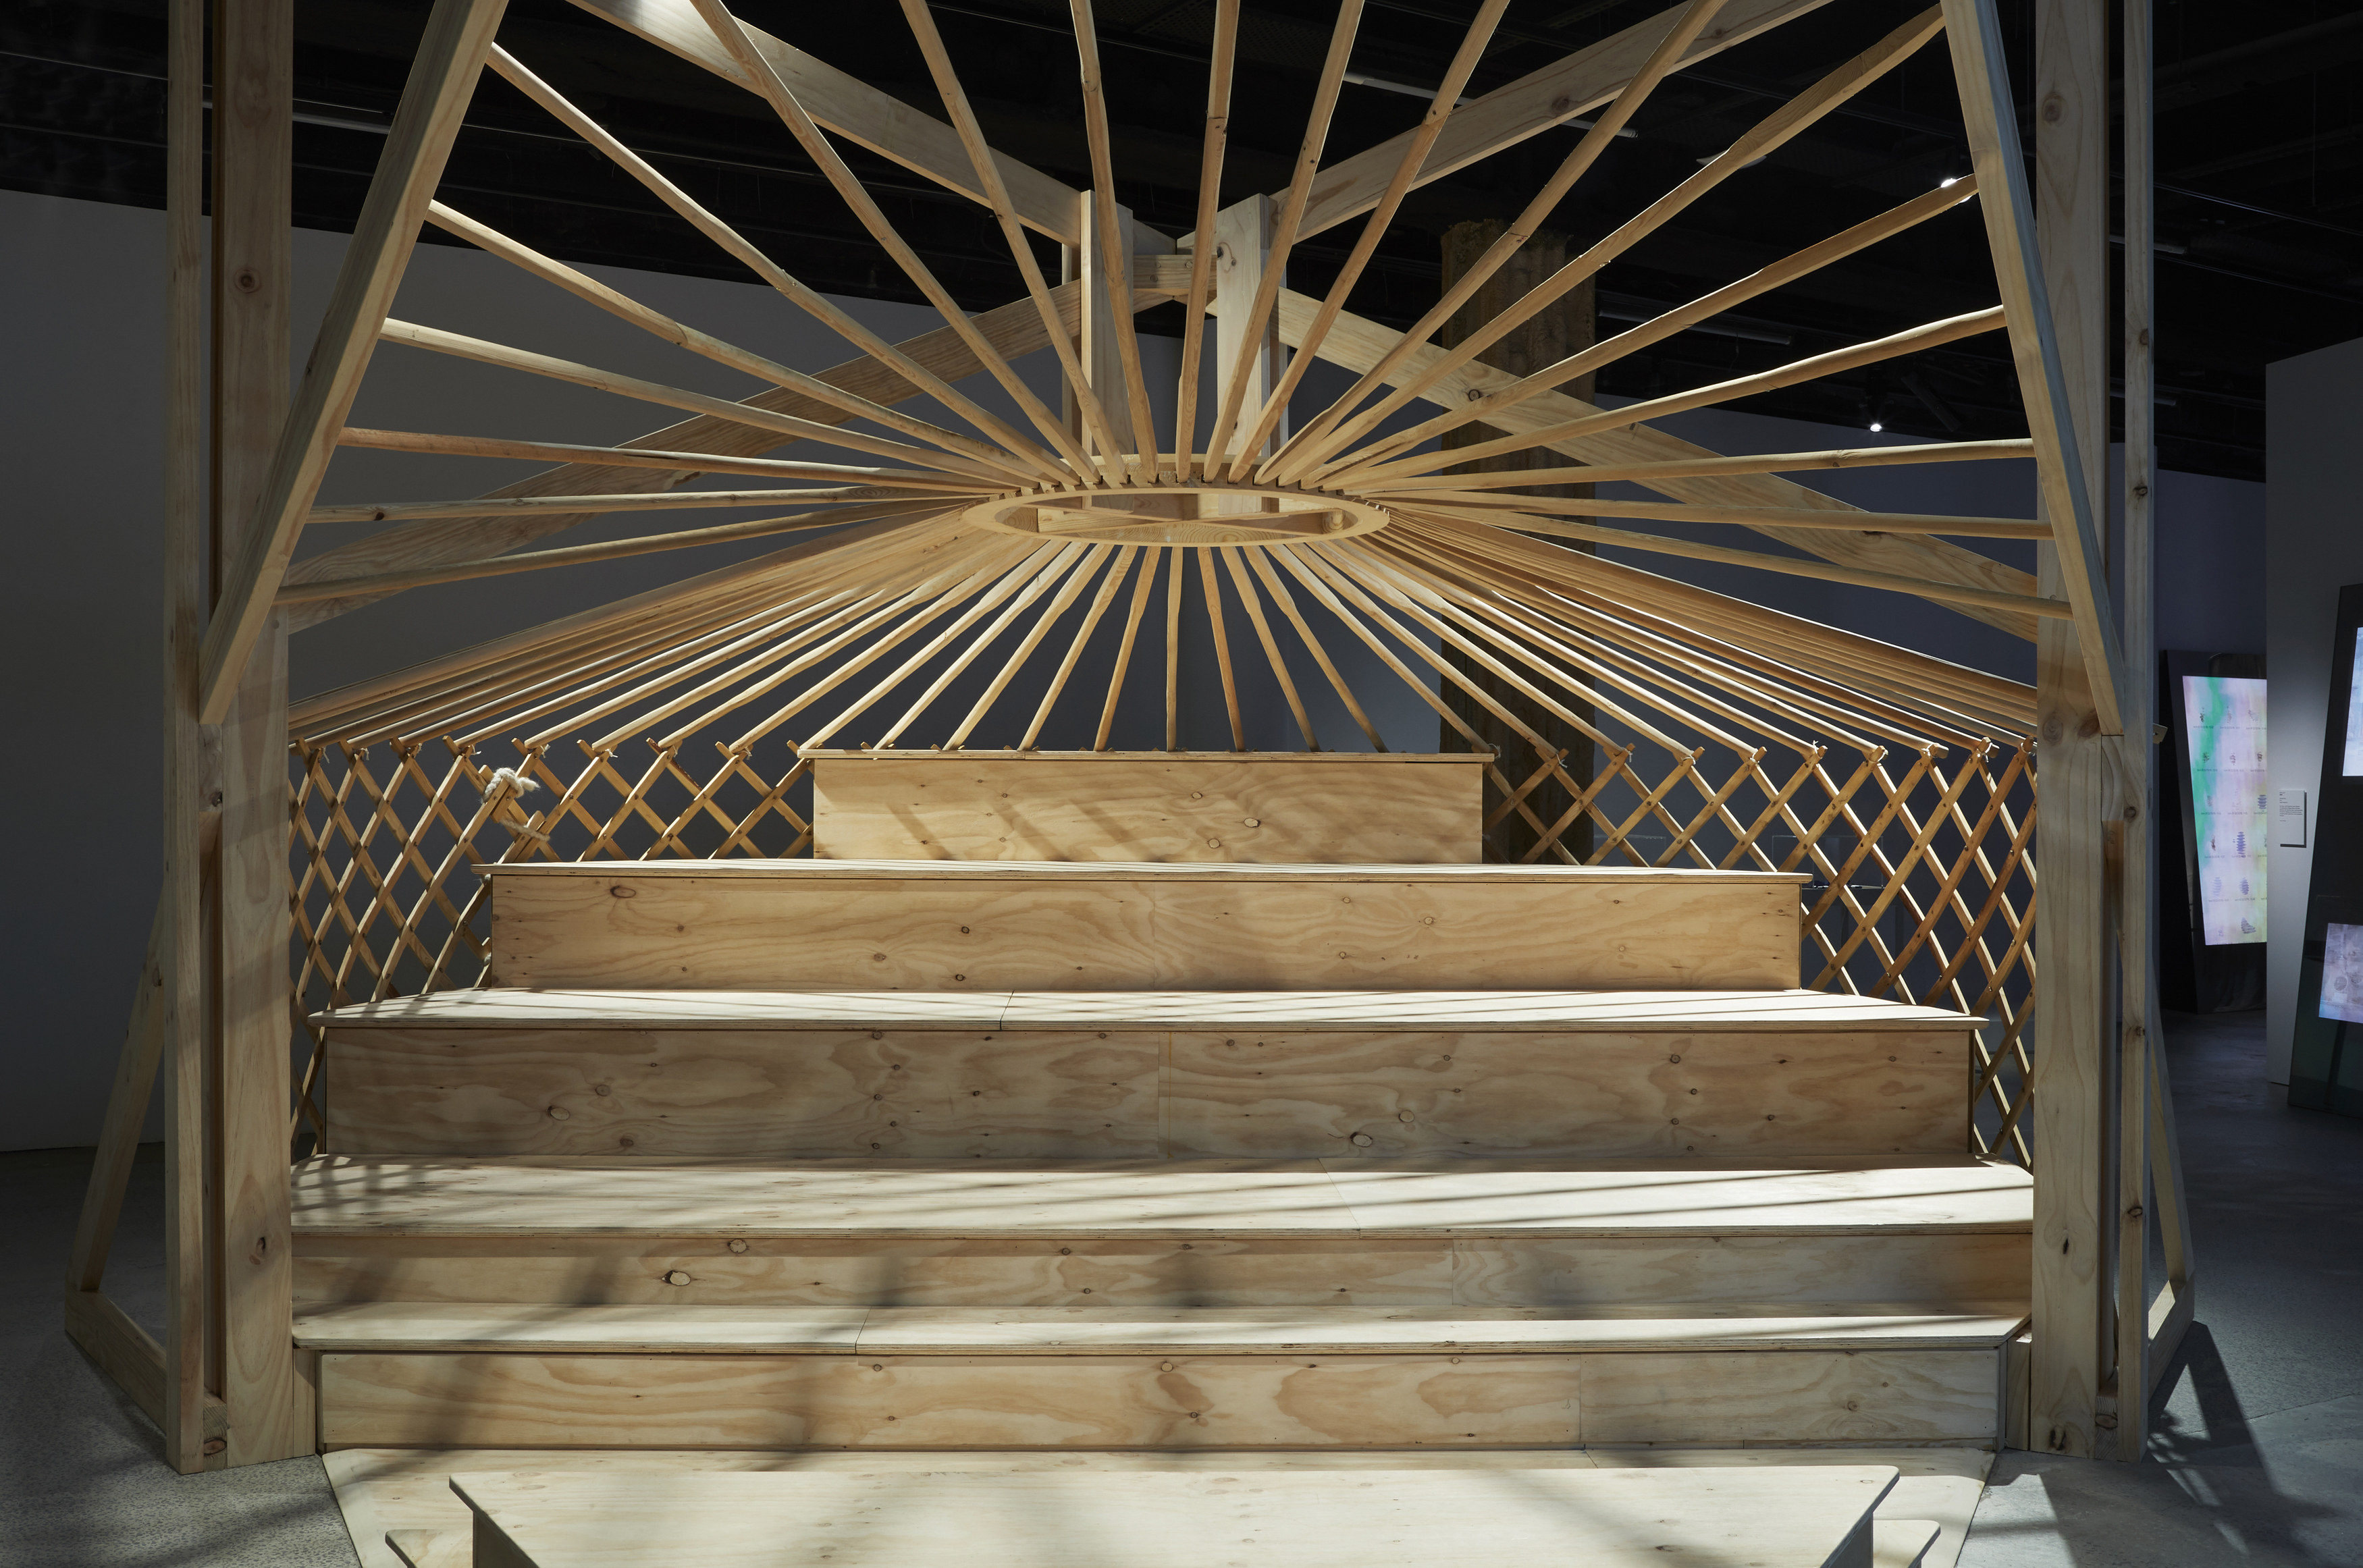 A five tiered wooden seating area with a latticed wooden framework behind and a central heating exhaust at the apex from which wooden beams connect to the latticed walls.